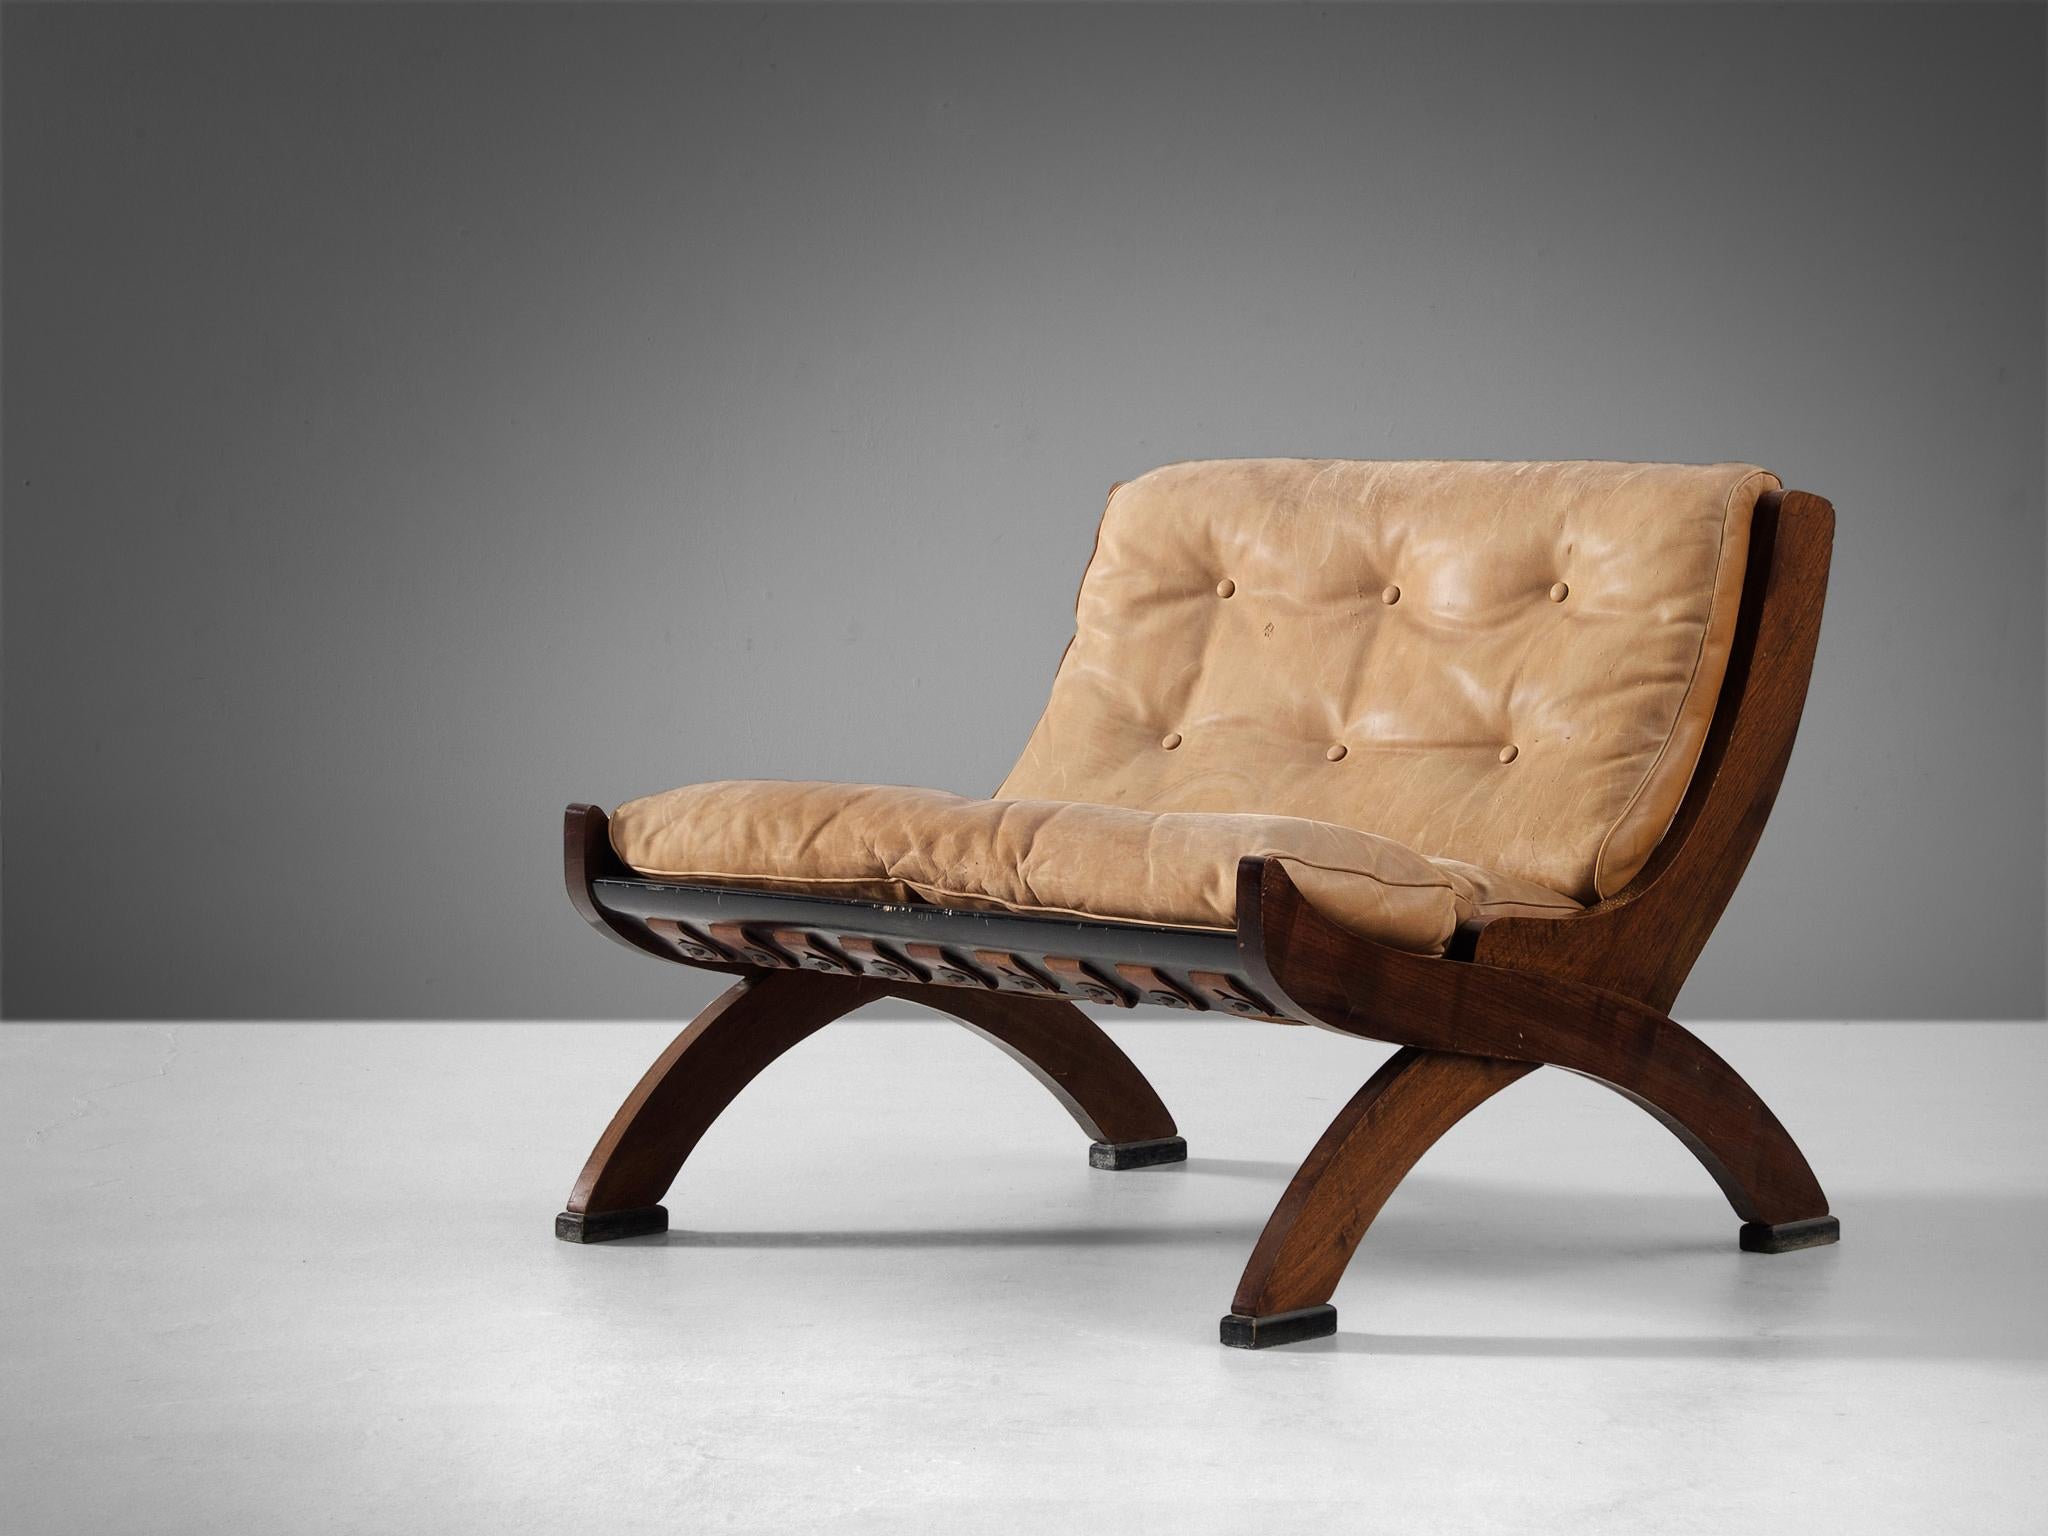 Marco Comolli for I.C.F. De Padova, lounge chair model 'CP1', leather, walnut, italy, 1960s 

This well-constructed slipper chair embodies a splendid structure based on a simplistic, natural and timeless aesthetics. The walnut frame is beautifully